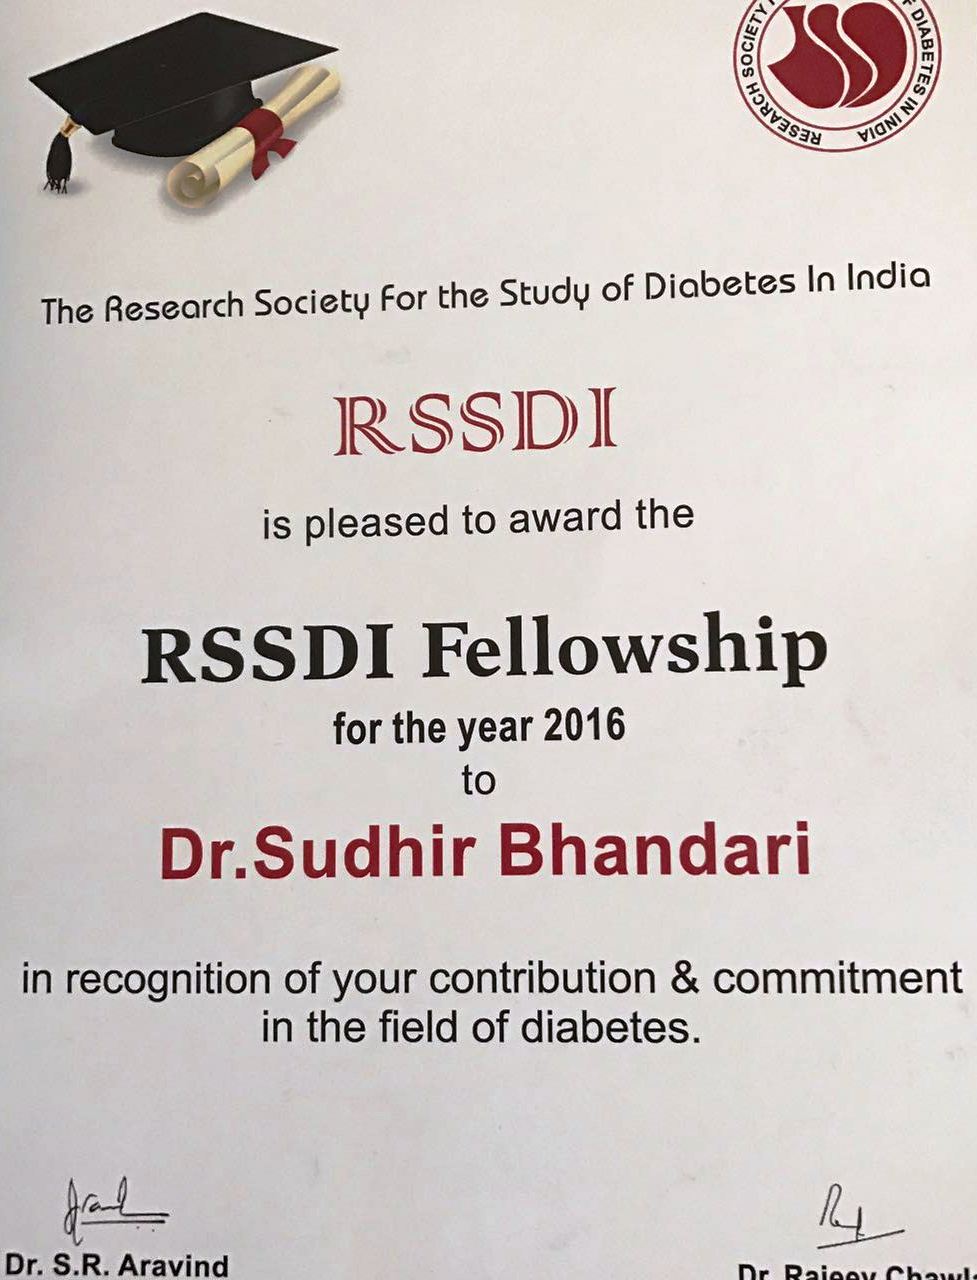 FRSSDI 2016 _Fellowship Award in Research Society for the Study of Diabetes in India, 18-11-2016